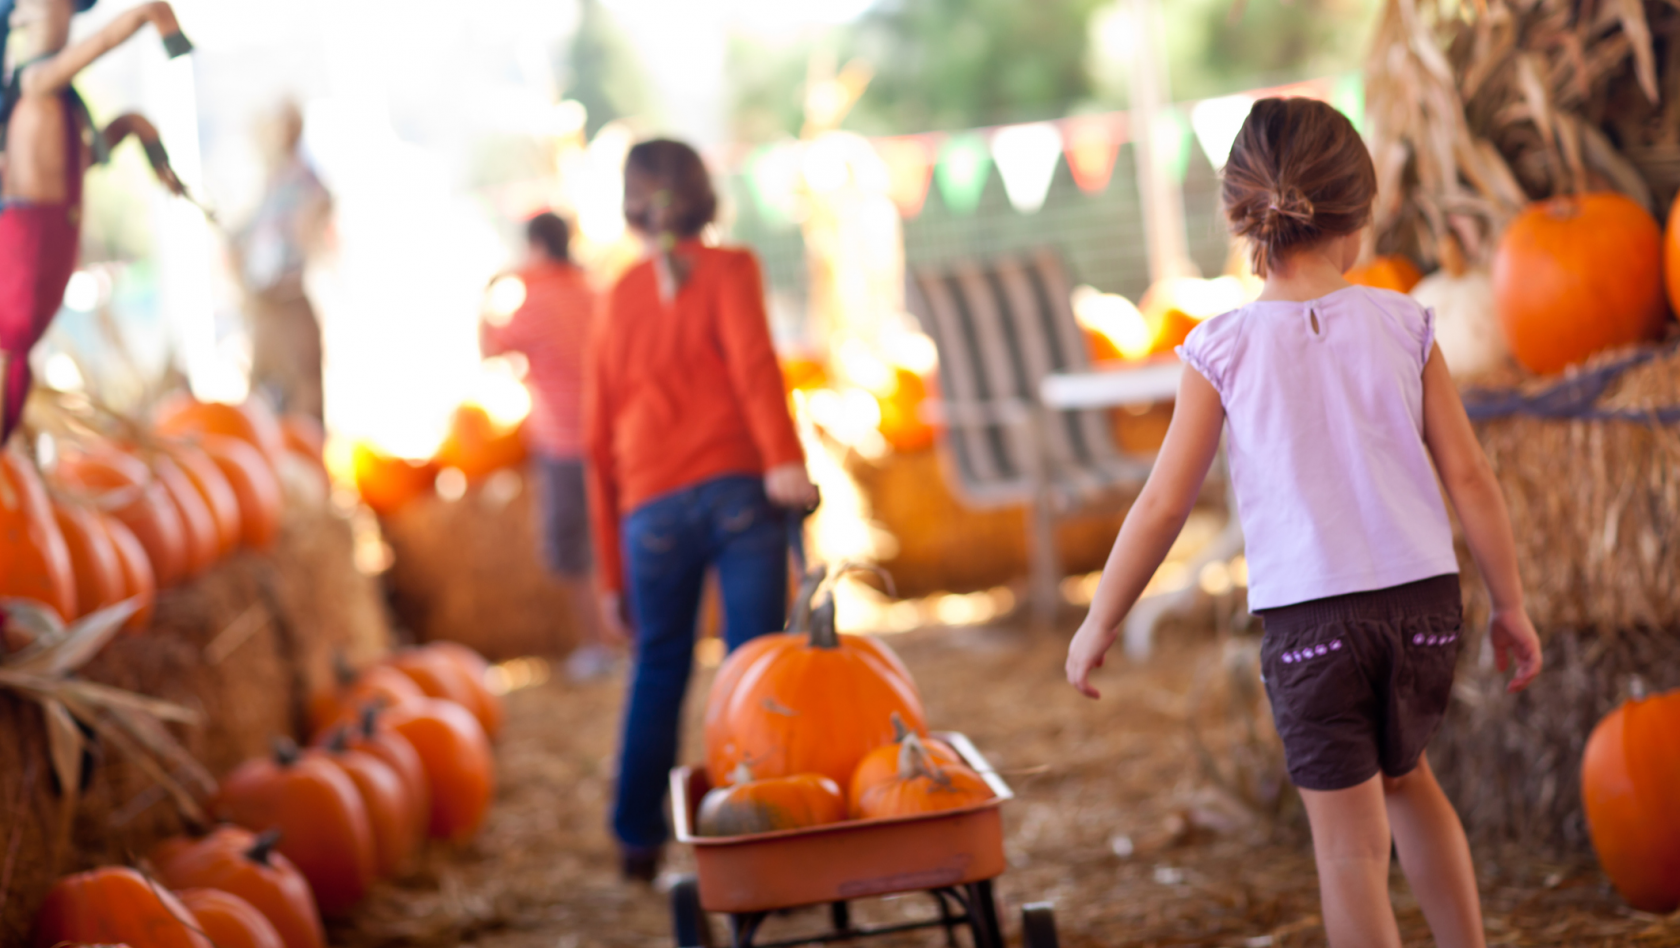 Little Girls Pulling Their Pumpkins In A Wagon At A Pumpkin Patch One Fall Day.